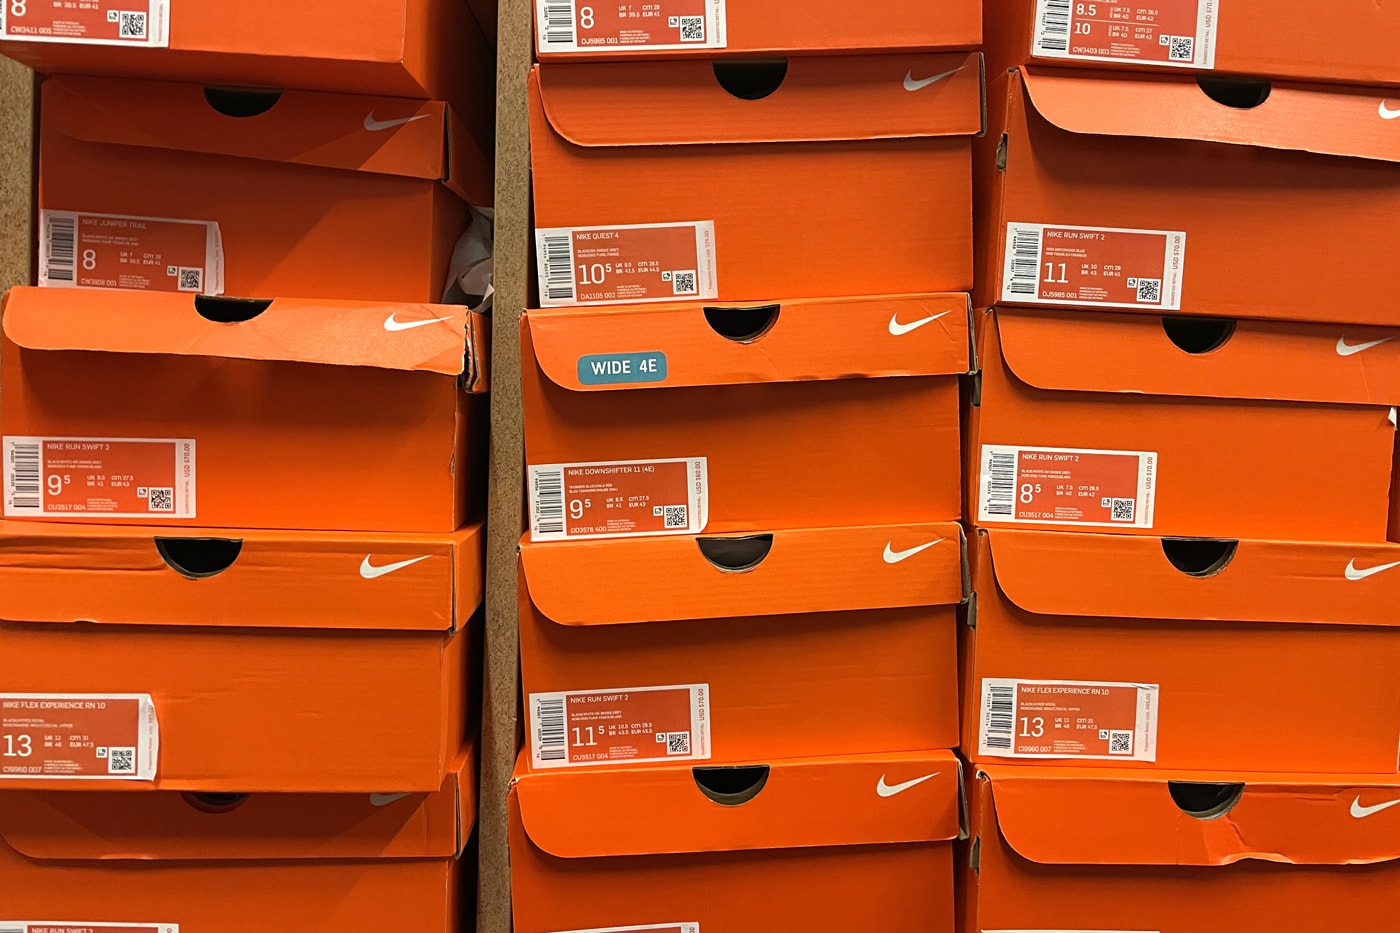 Organized Crime Responsible for Rising Theft Across Entire Sneaker Supply Chain